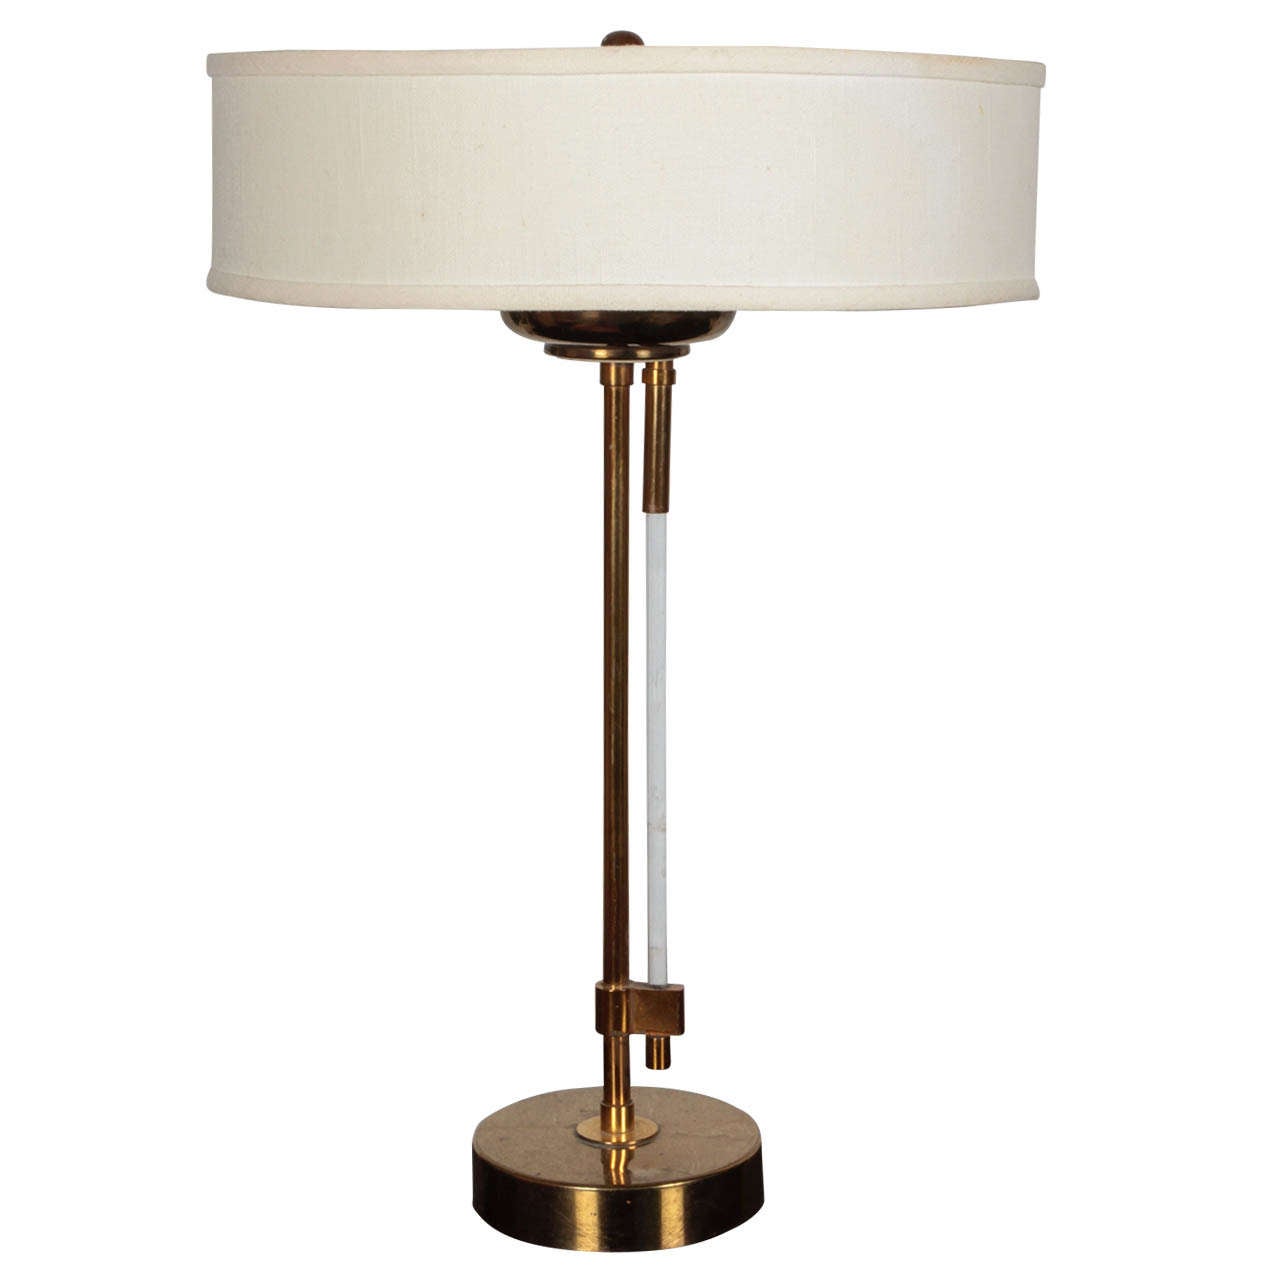 Brass table lamp with intricate lucite switch-1940's